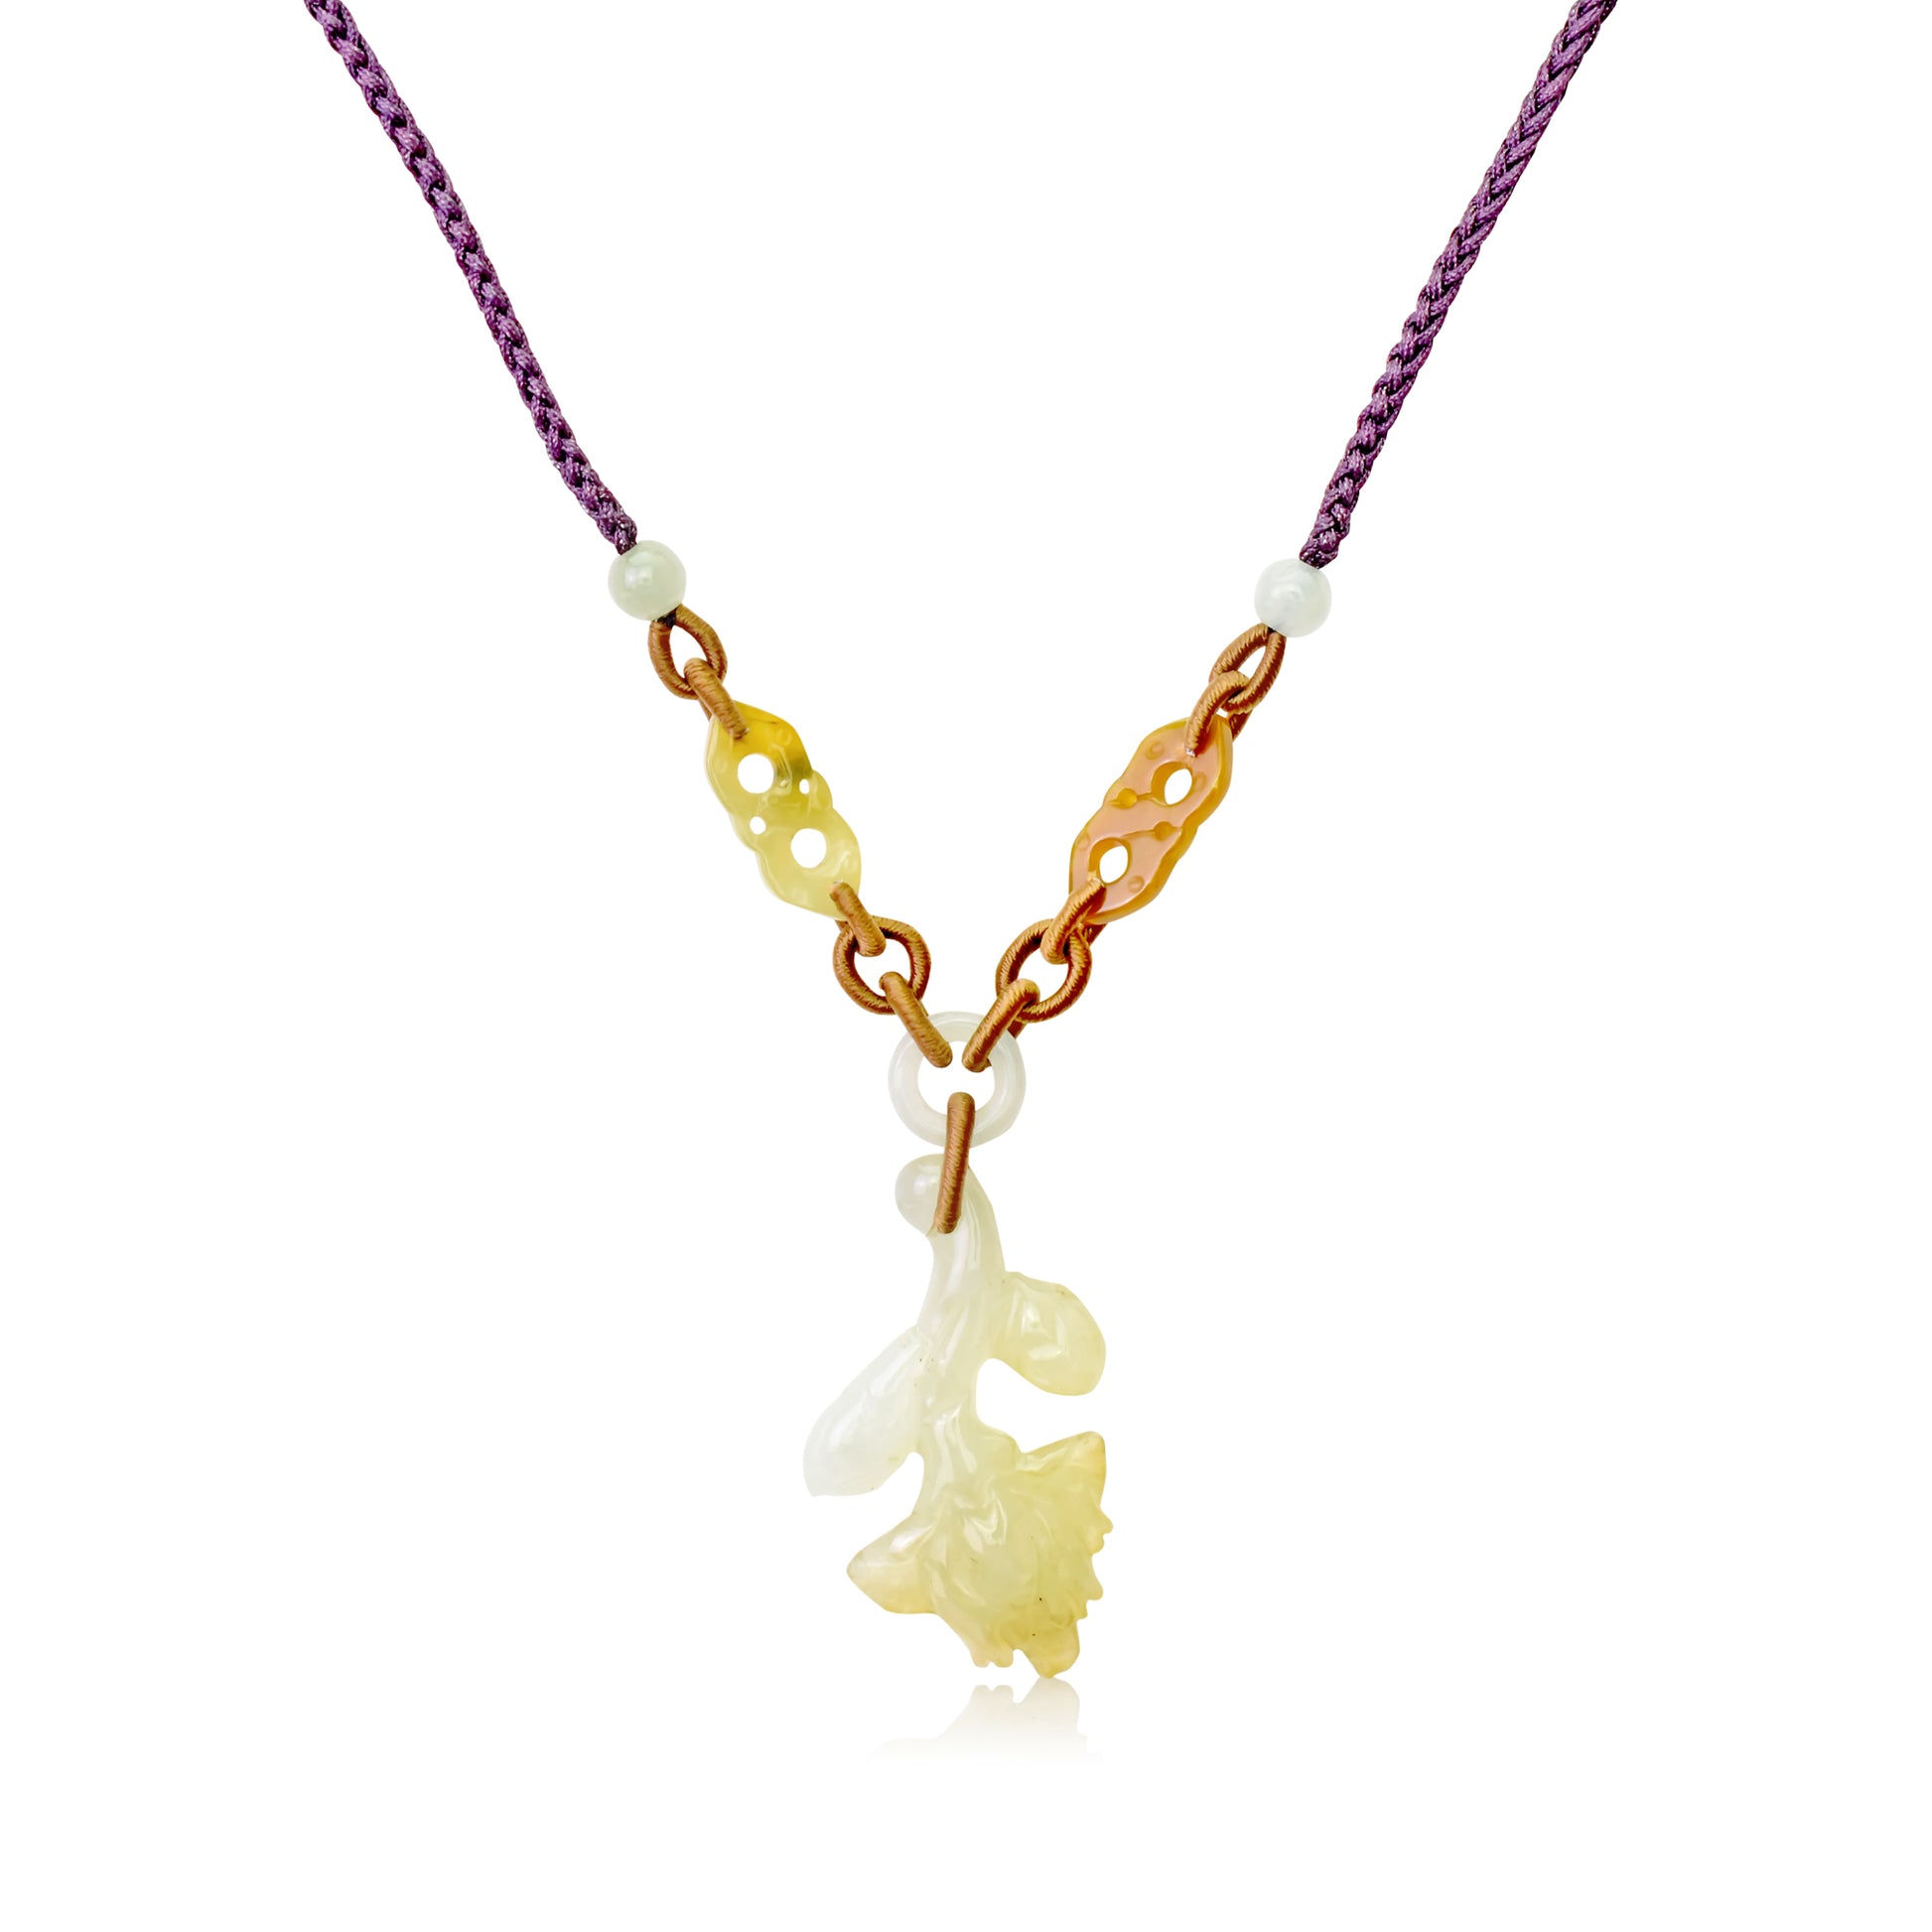 Show Your Strength and Resilience with a Protea Flower Necklace made with Lavender Cord